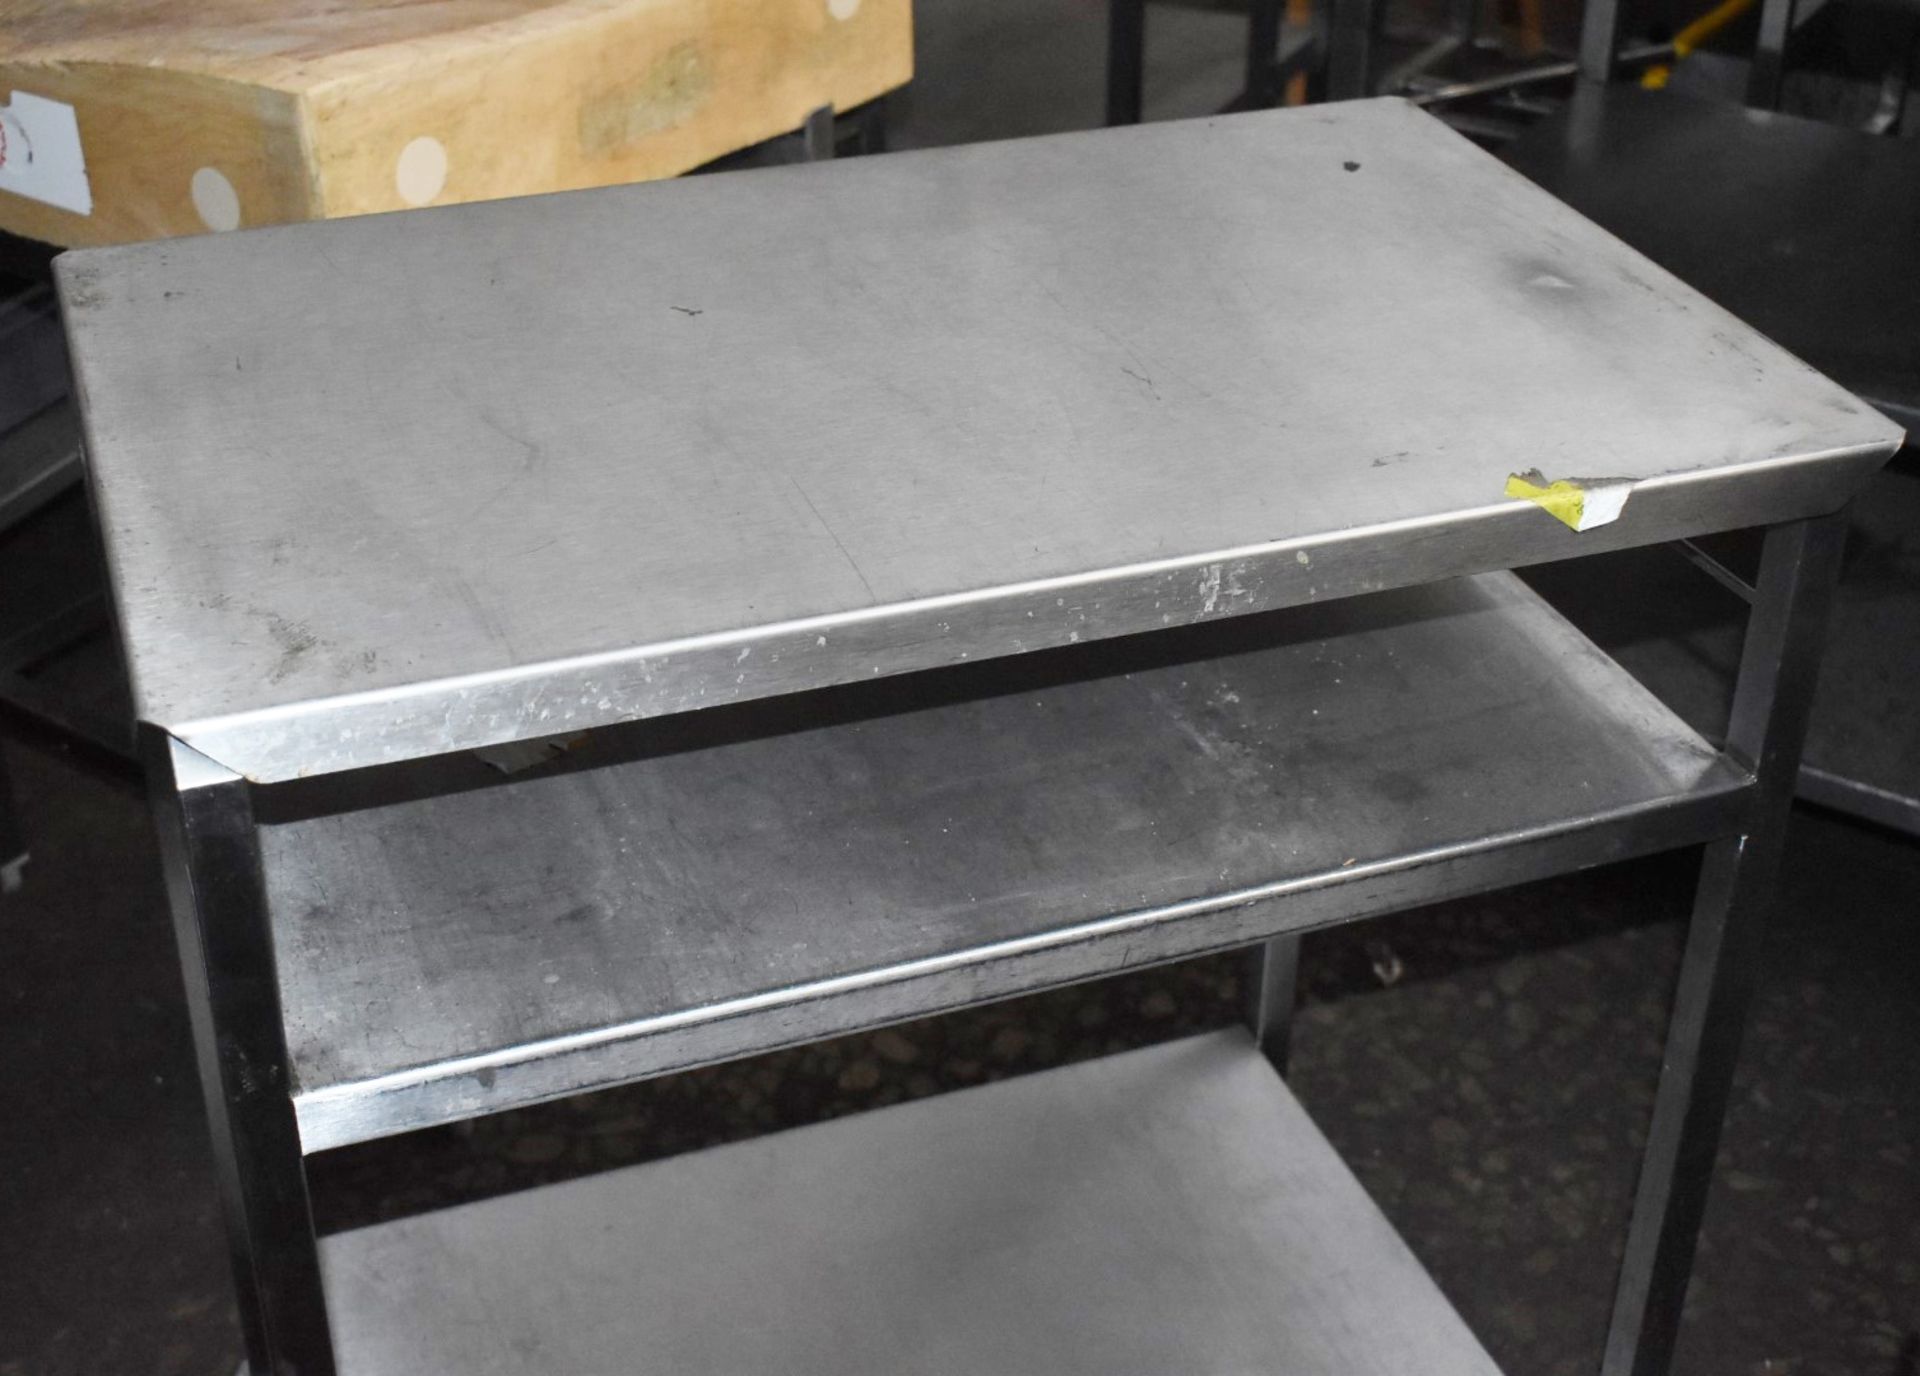 1 x Stainless Steel Mobile Prep Table / Trolley - Features Removable Top - Size: H87 x W74 x D46 cms - Image 2 of 4